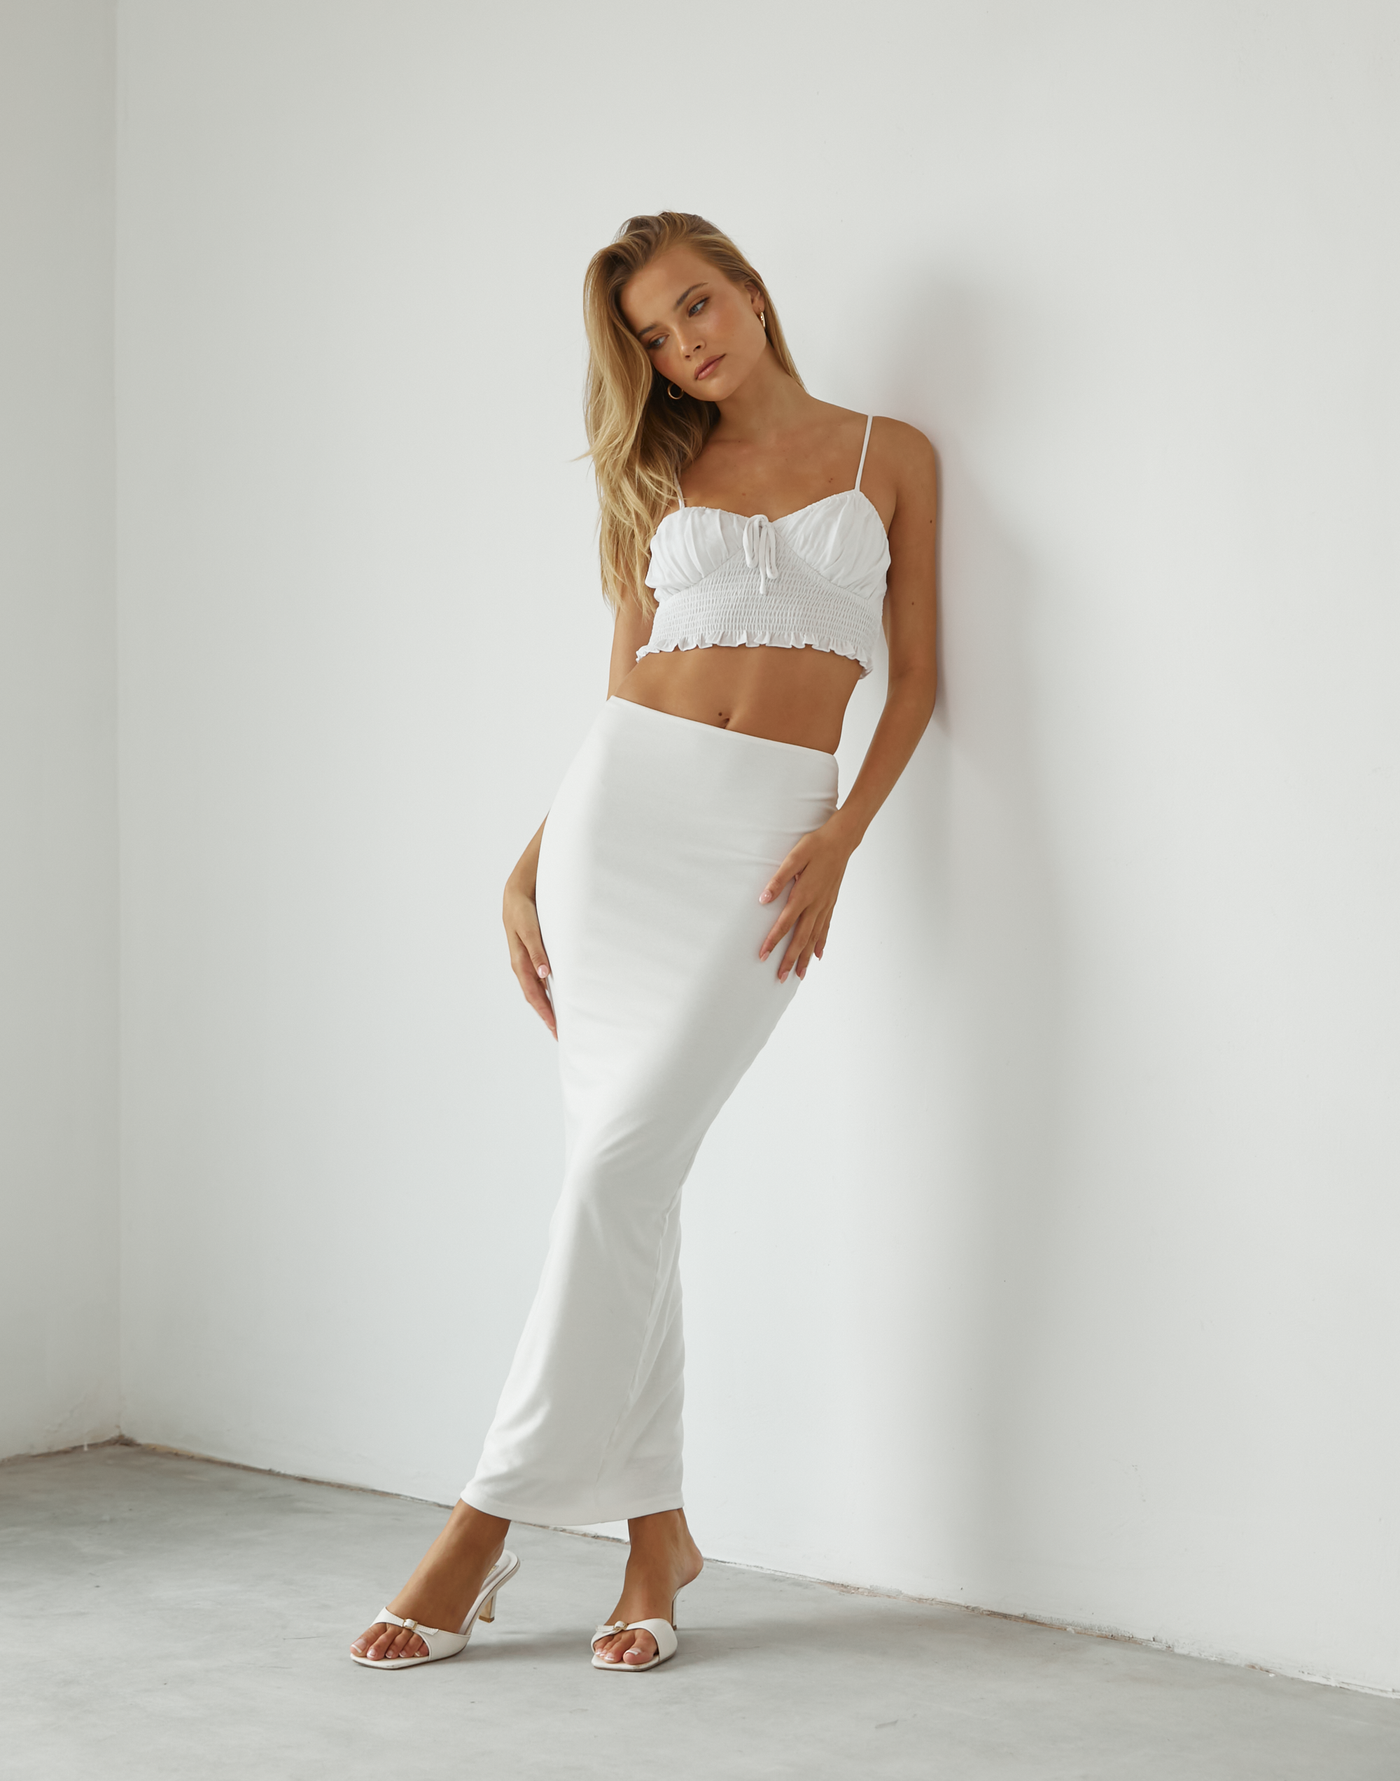 Mani Crop Top (White) - White Crop Top - Women's Tops - Charcoal Clothing